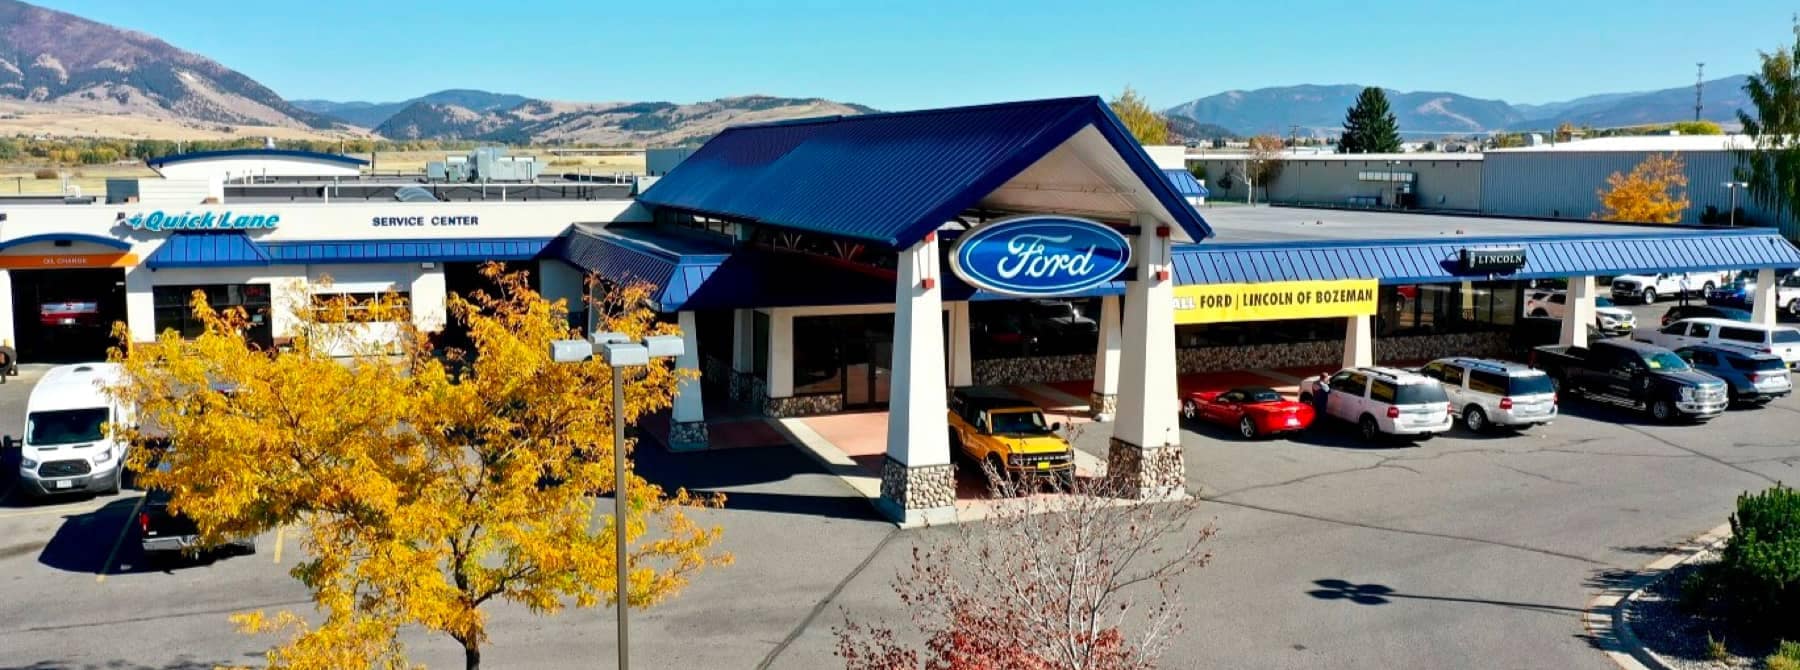 Ford Dealership in Bozeman, MT Selling Bozeman Used Cars